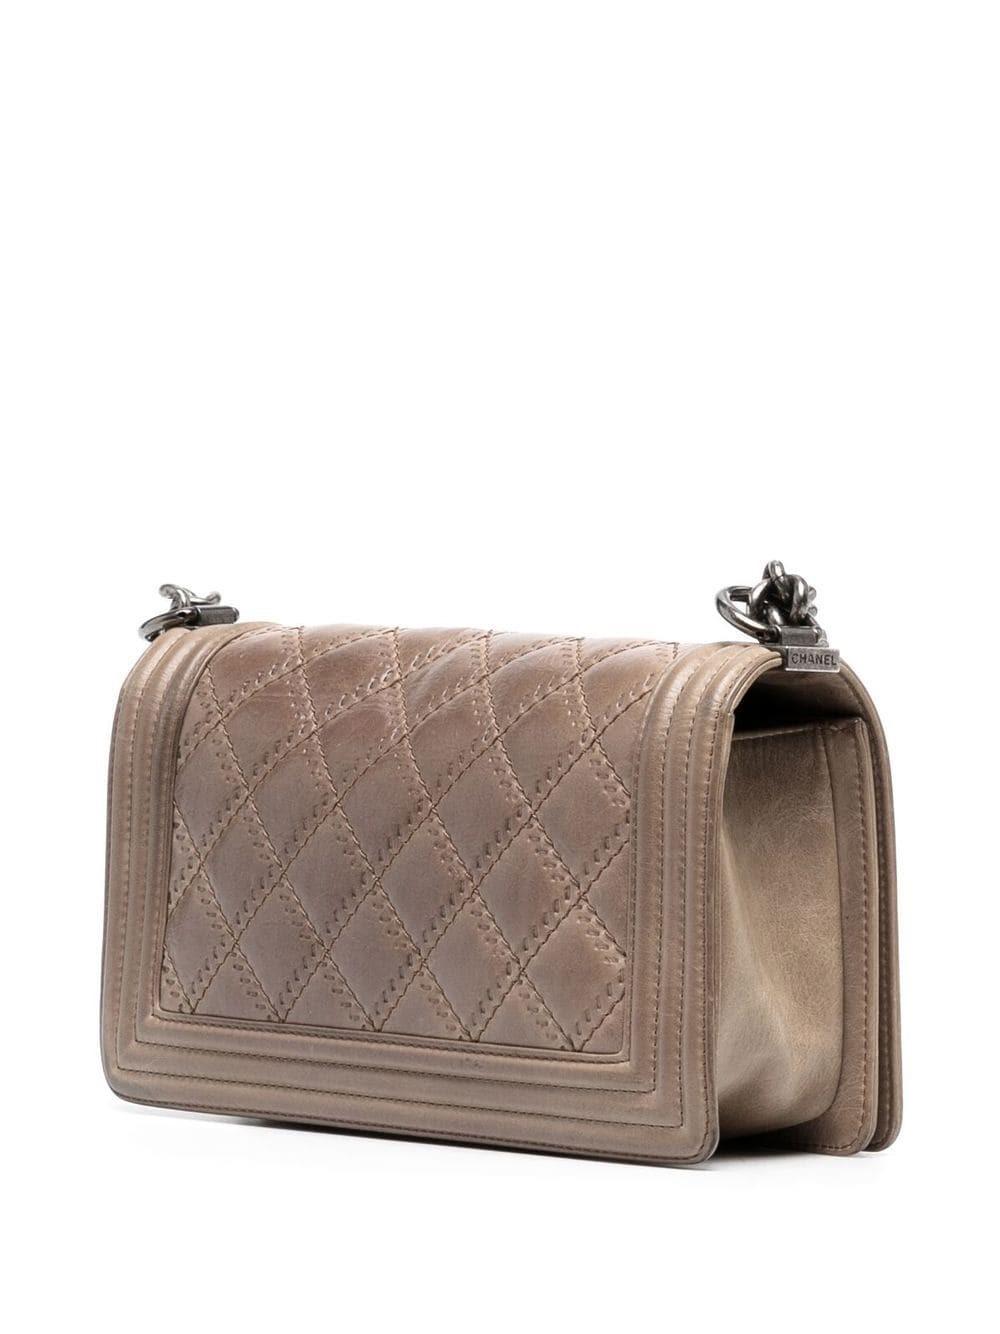 One of the most iconic bags of all time, this Chanel Medium Boy Bag is crafted of quilted aged leather and features an identifiable double C fastening mechanism. The leather chain strap can be adjusted to wear crossbody or thrown on your shoulder.